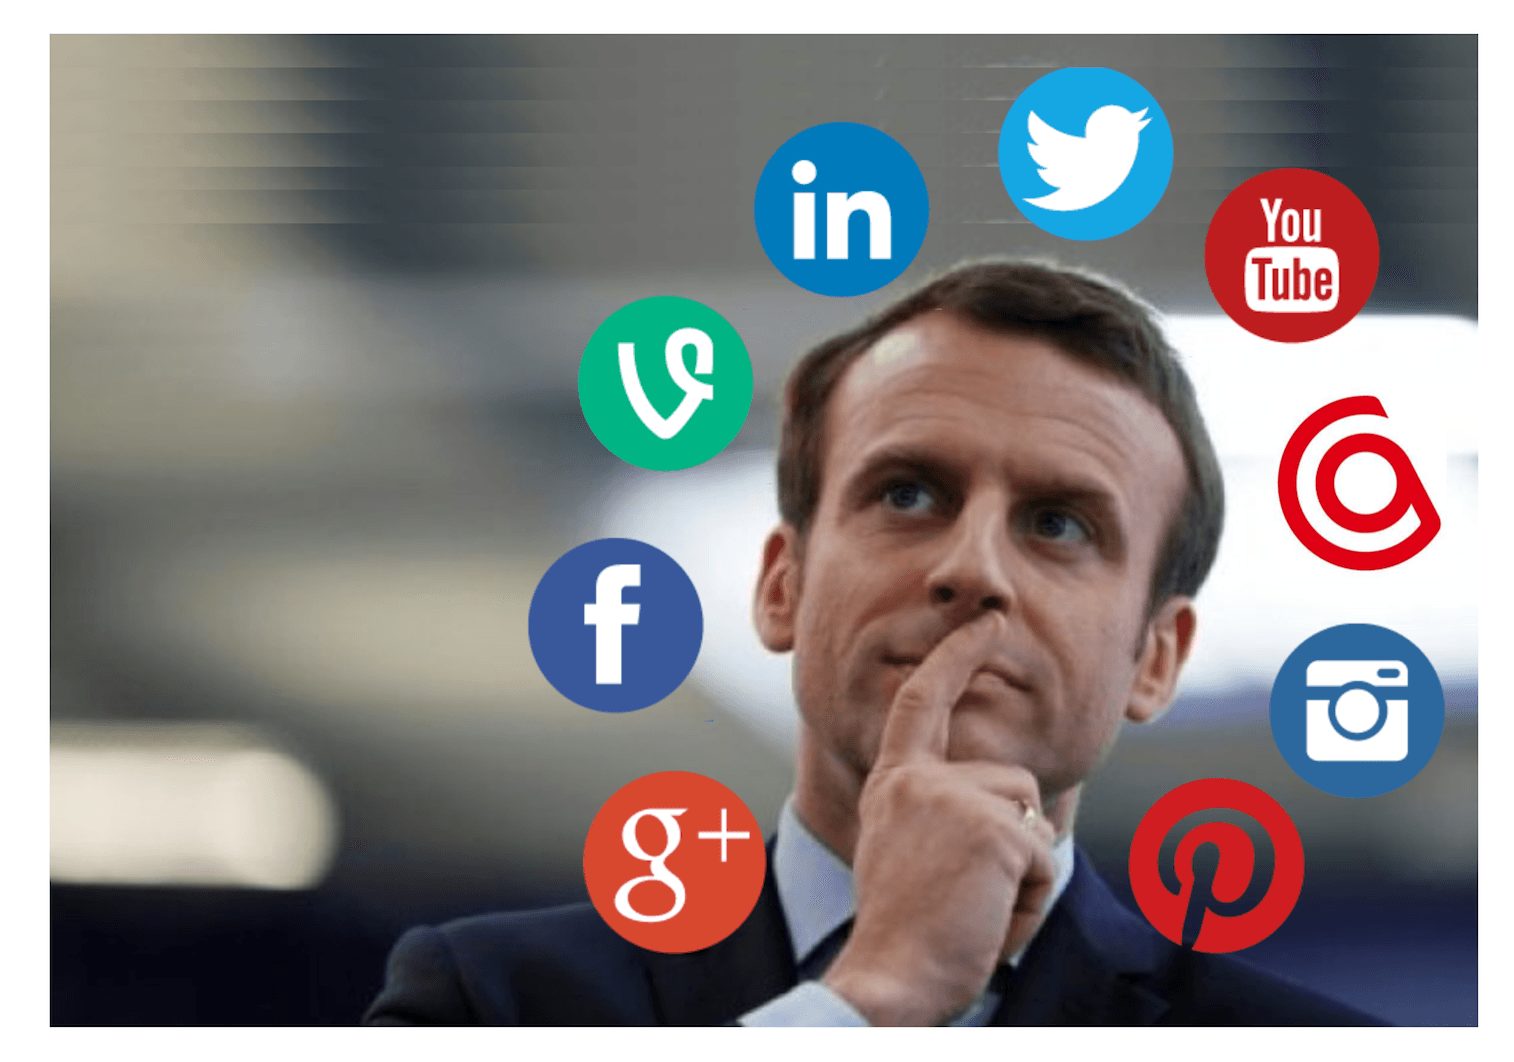 How Did The French Presidential Candidates Fare On Social Media?